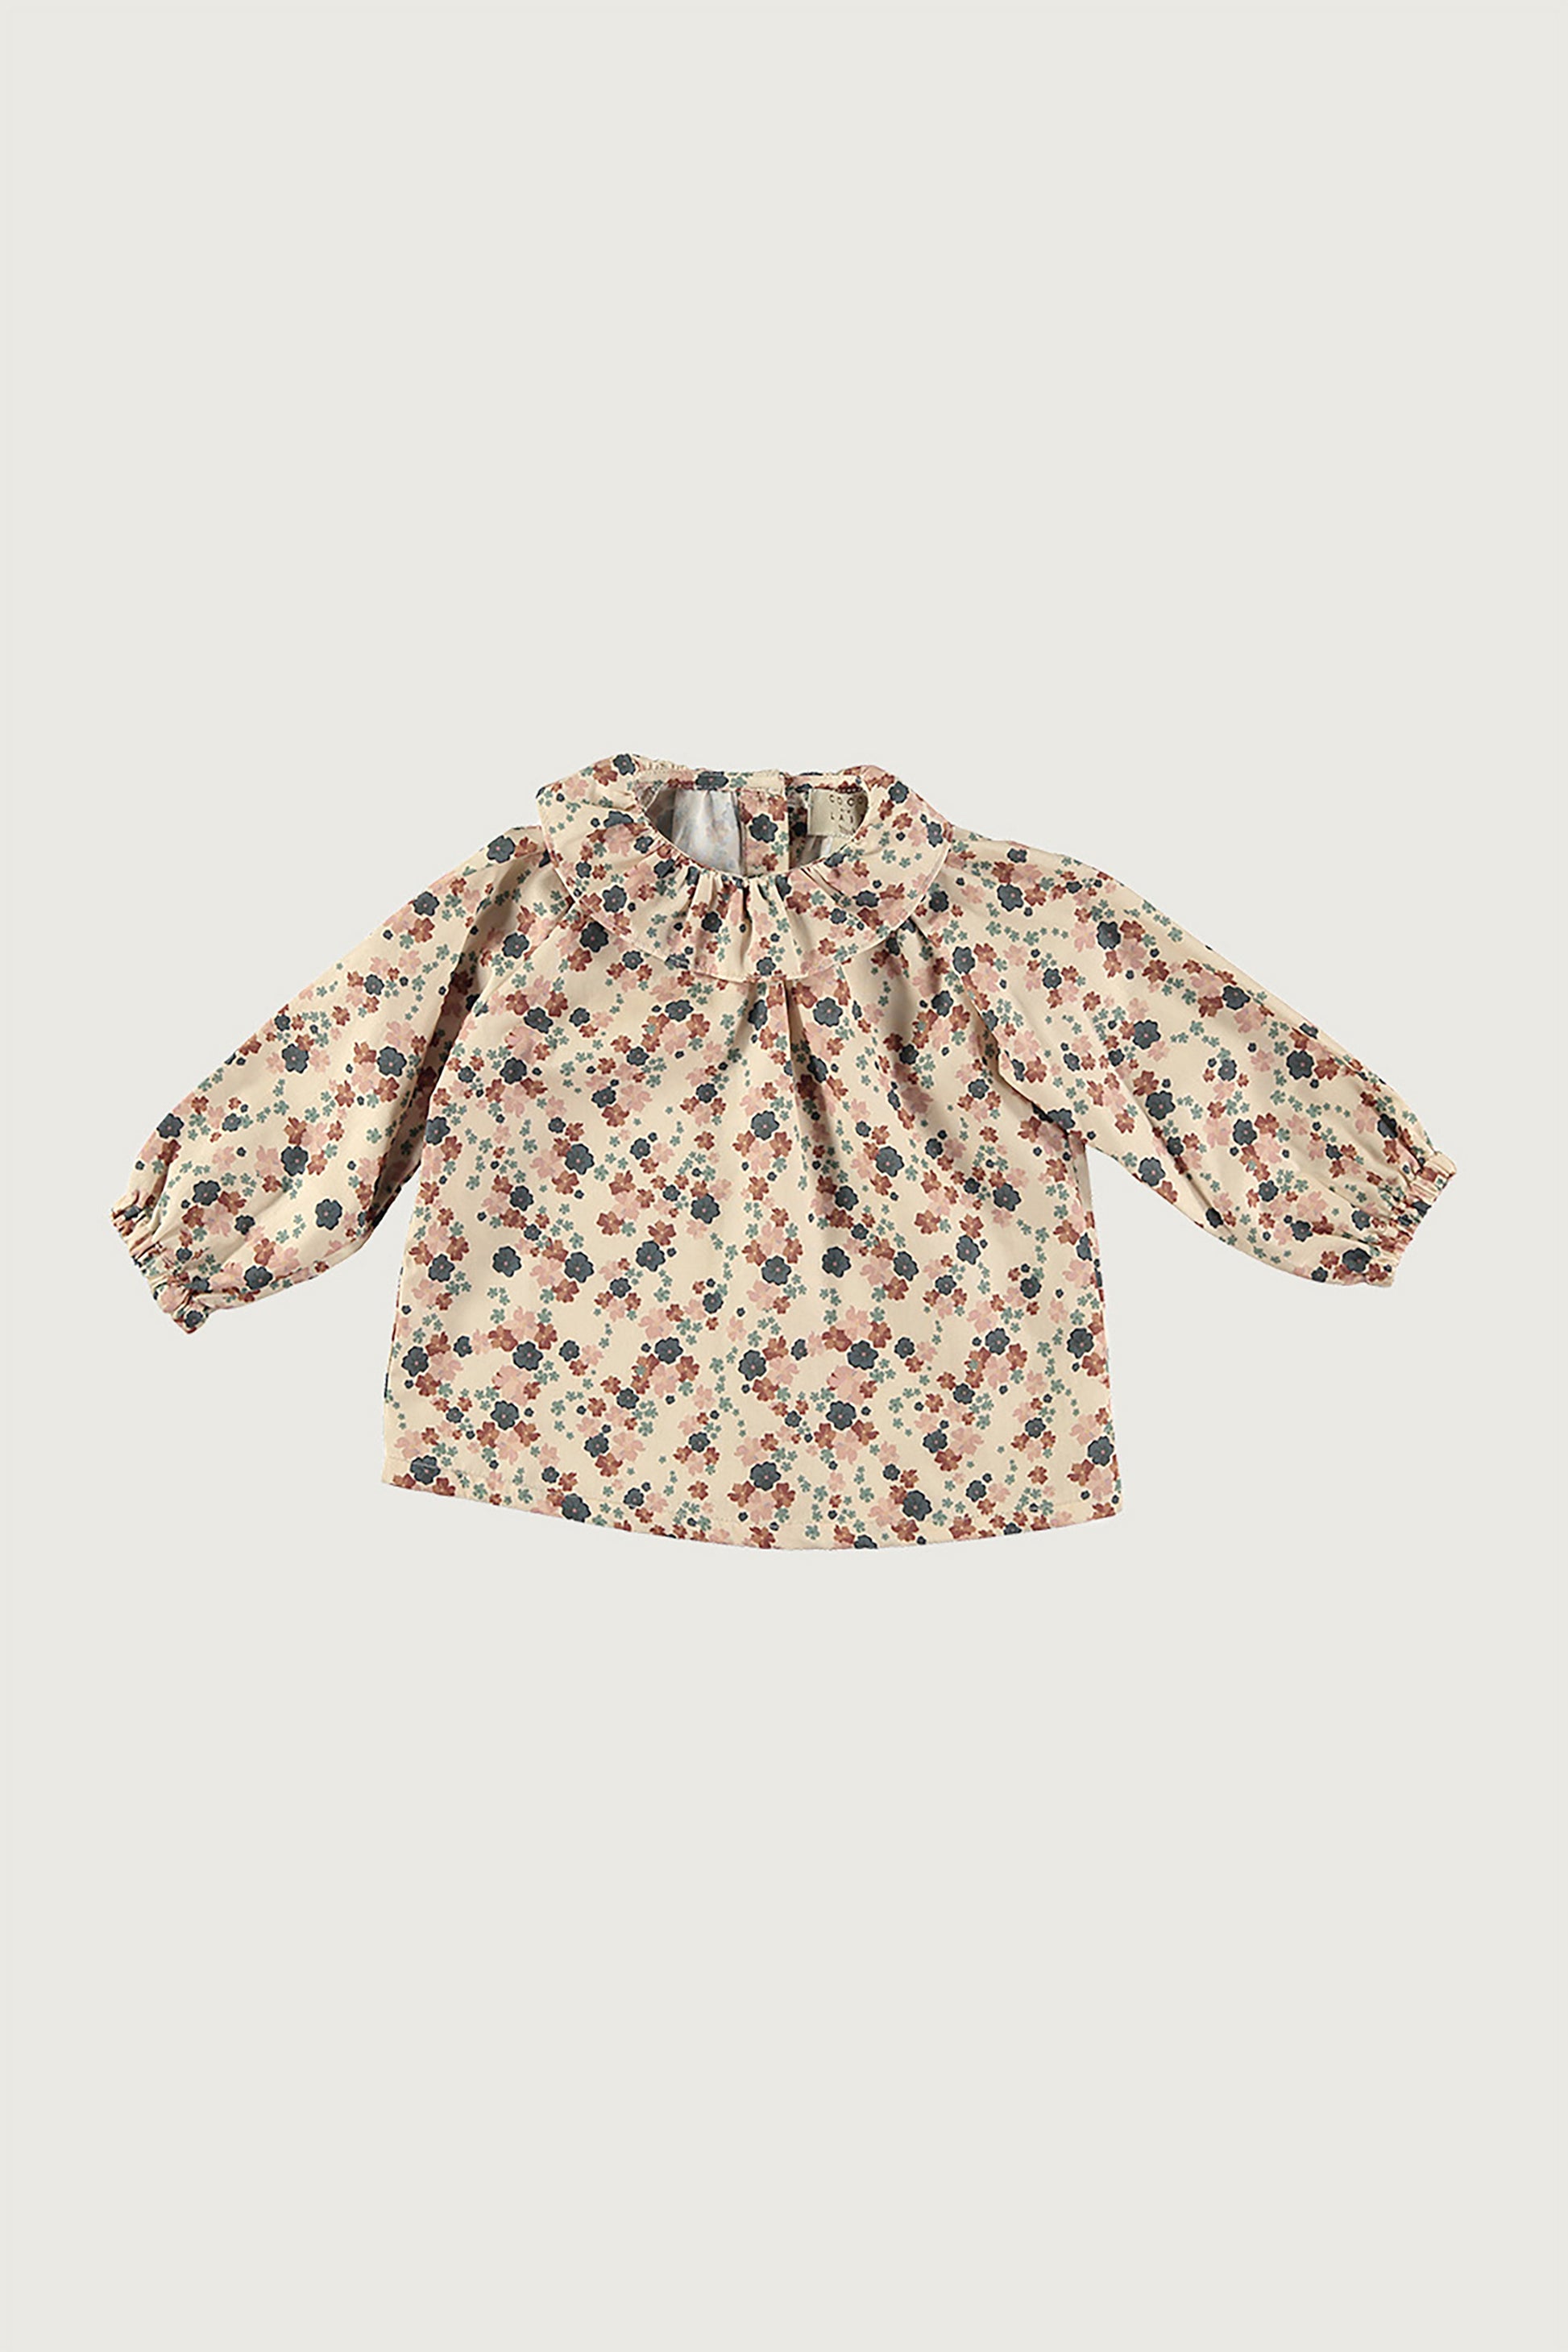 Coco Au Lait NUDE WILD FLOWERS BABY BLOUSE  Nude Wild